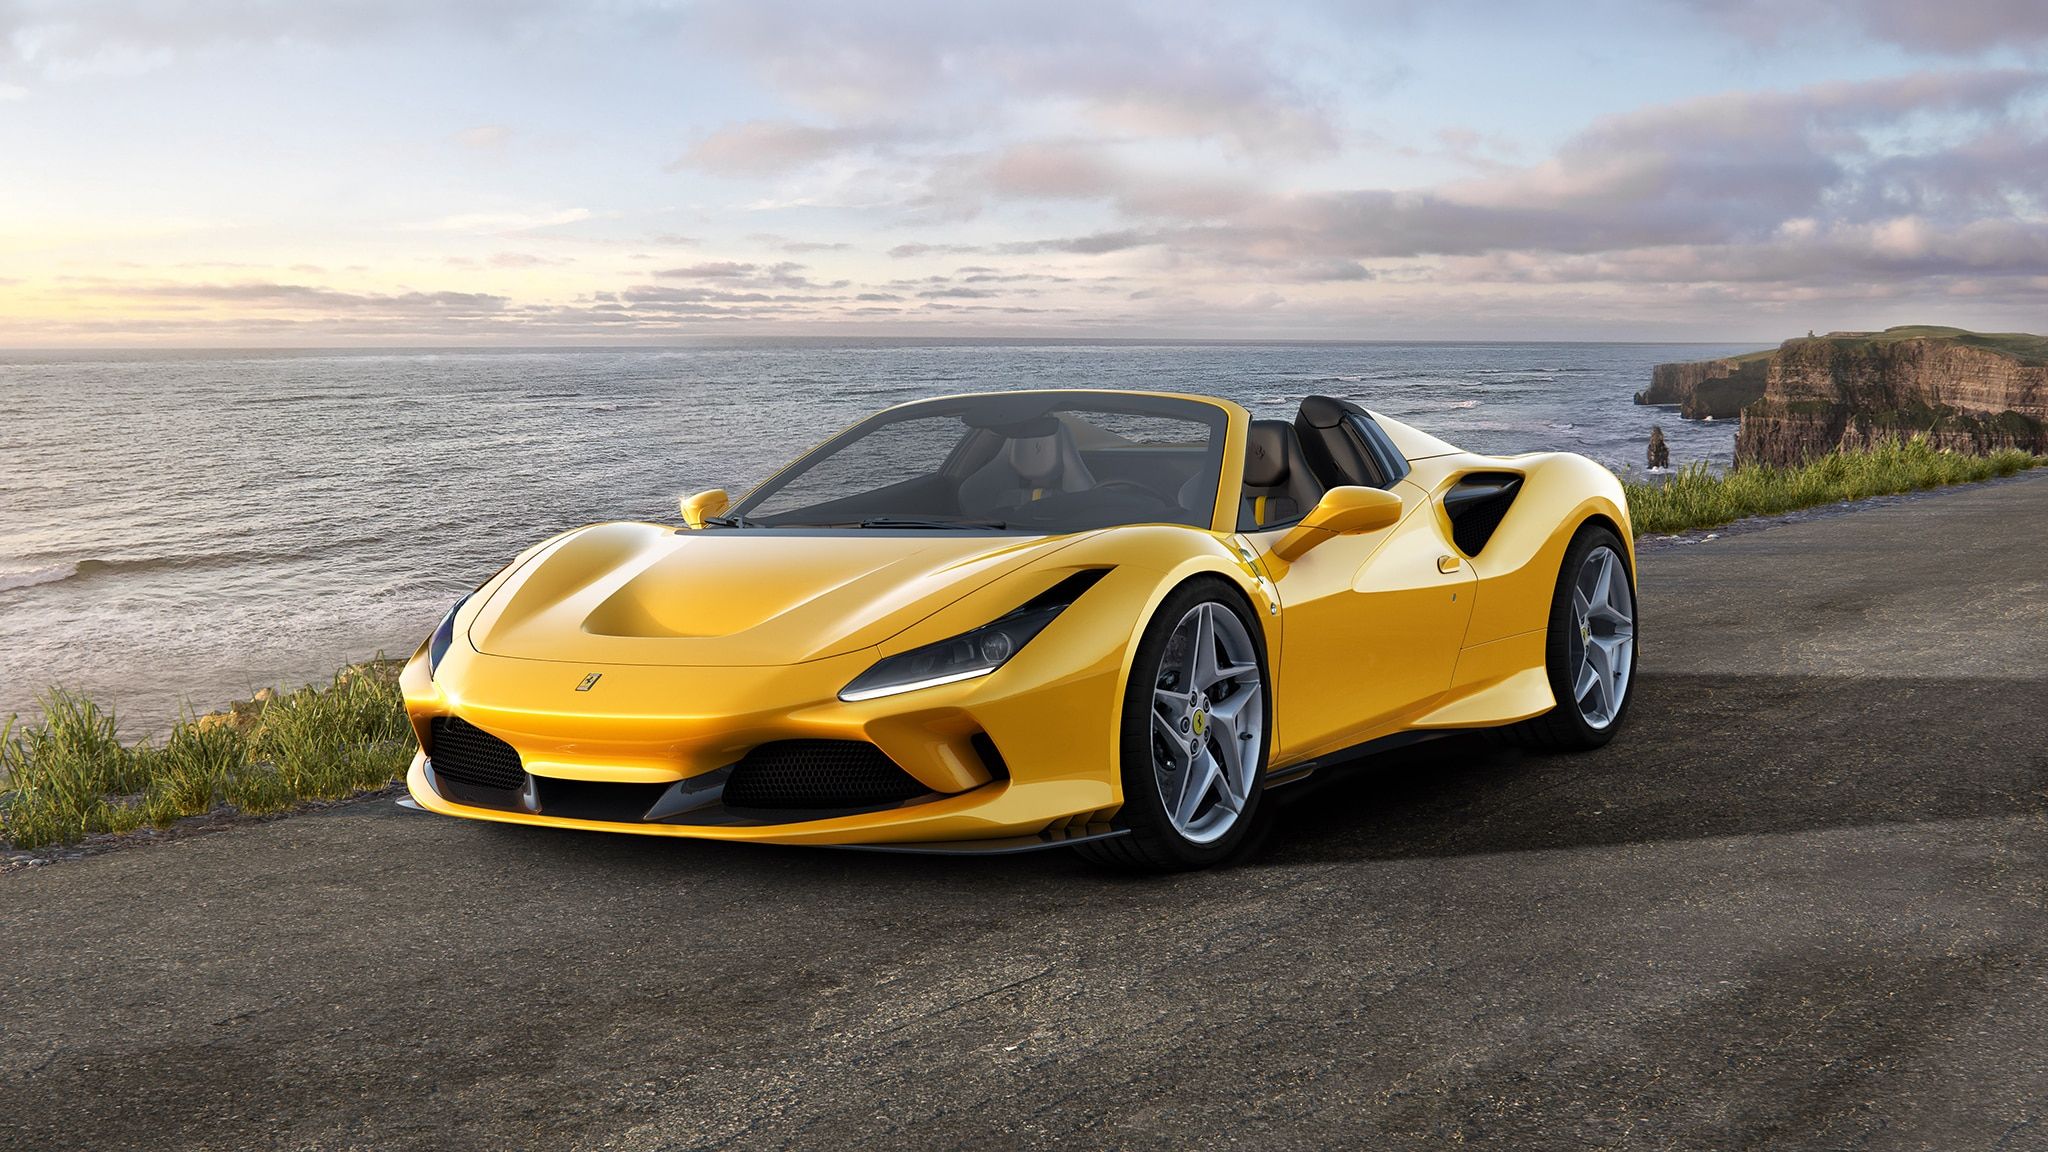 Ferrari F8 Spider Is A 710 HP Convertible With A 211 MPH Top Speed